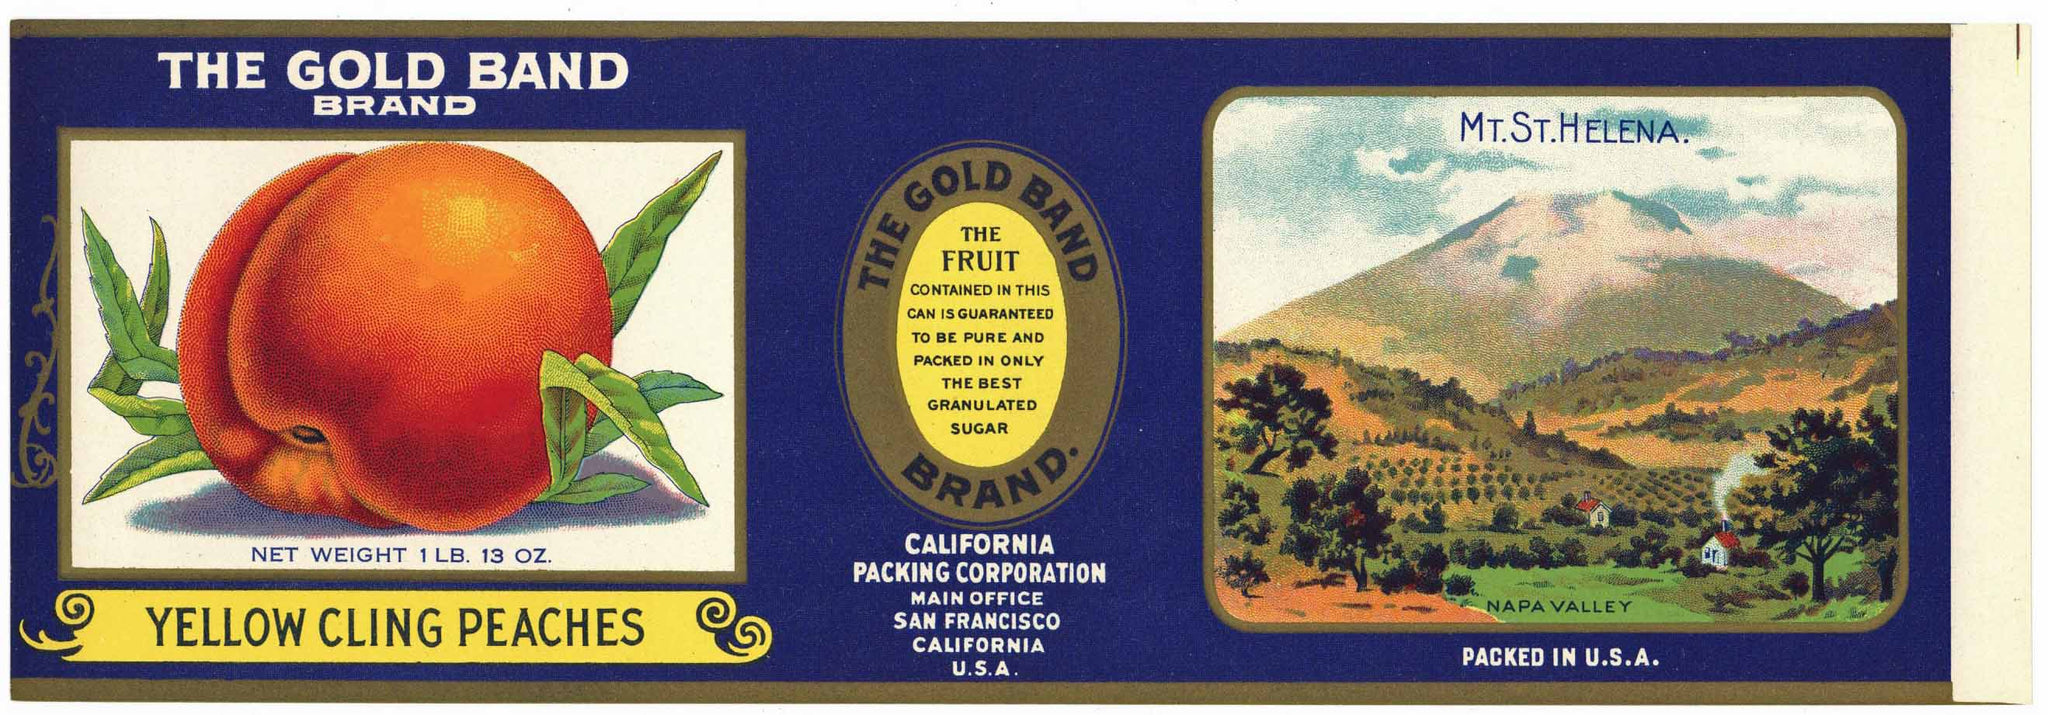 The Gold Band Brand Vintage Napa Valley Cling Peach Can Label